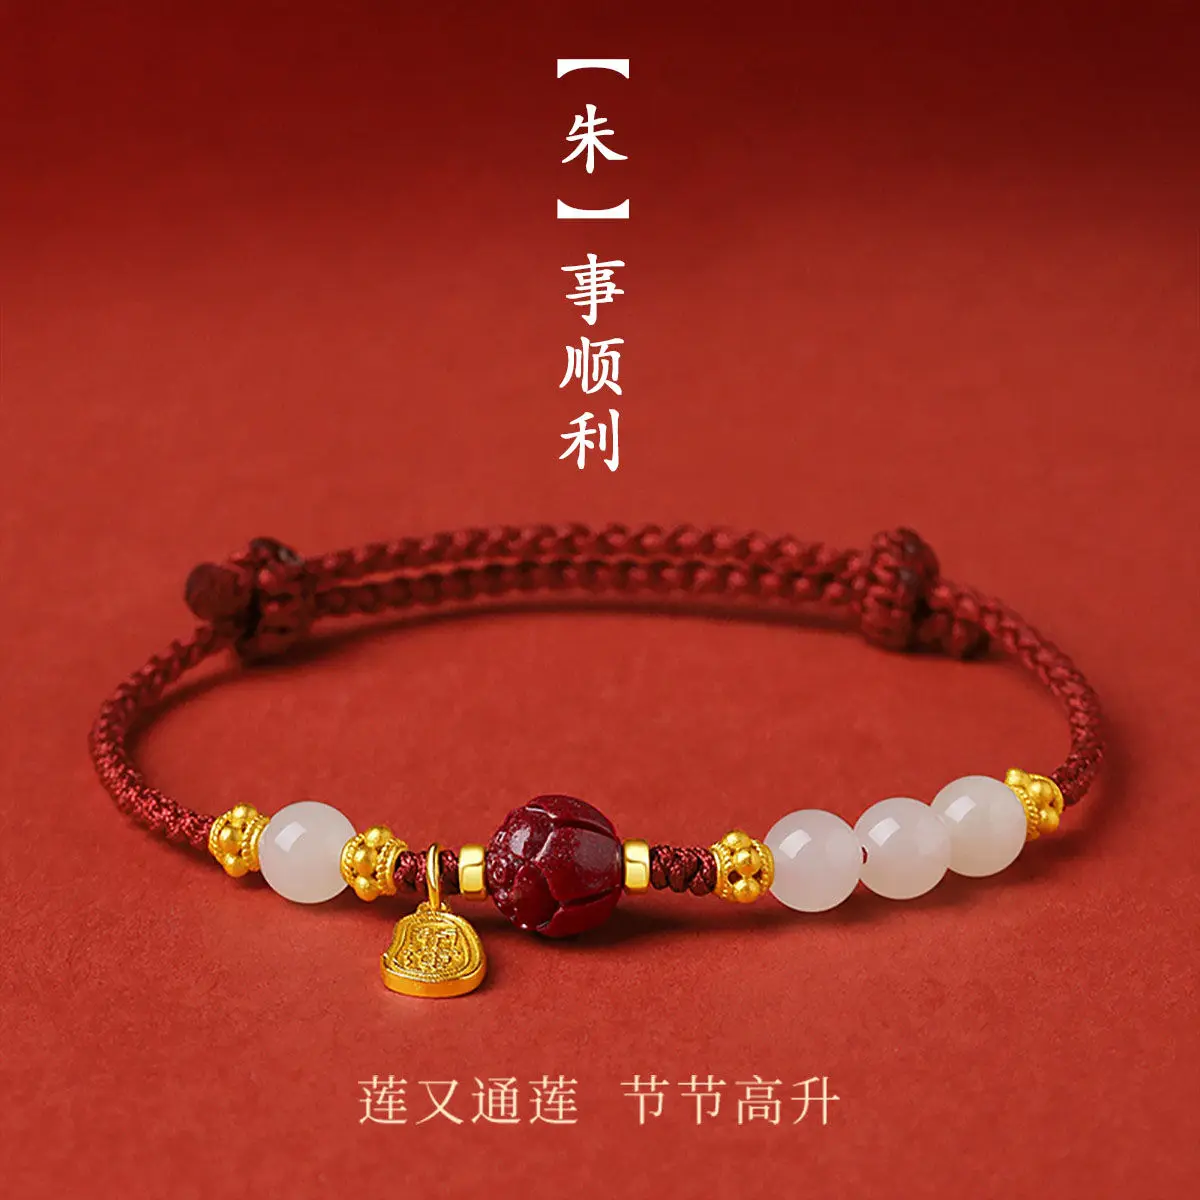 

UMQ Natural Hetian Jade Red Rope Bracelet Cinnabar National Style Niche Carrying Strap Lucky Birthday Gift for Girlfriend